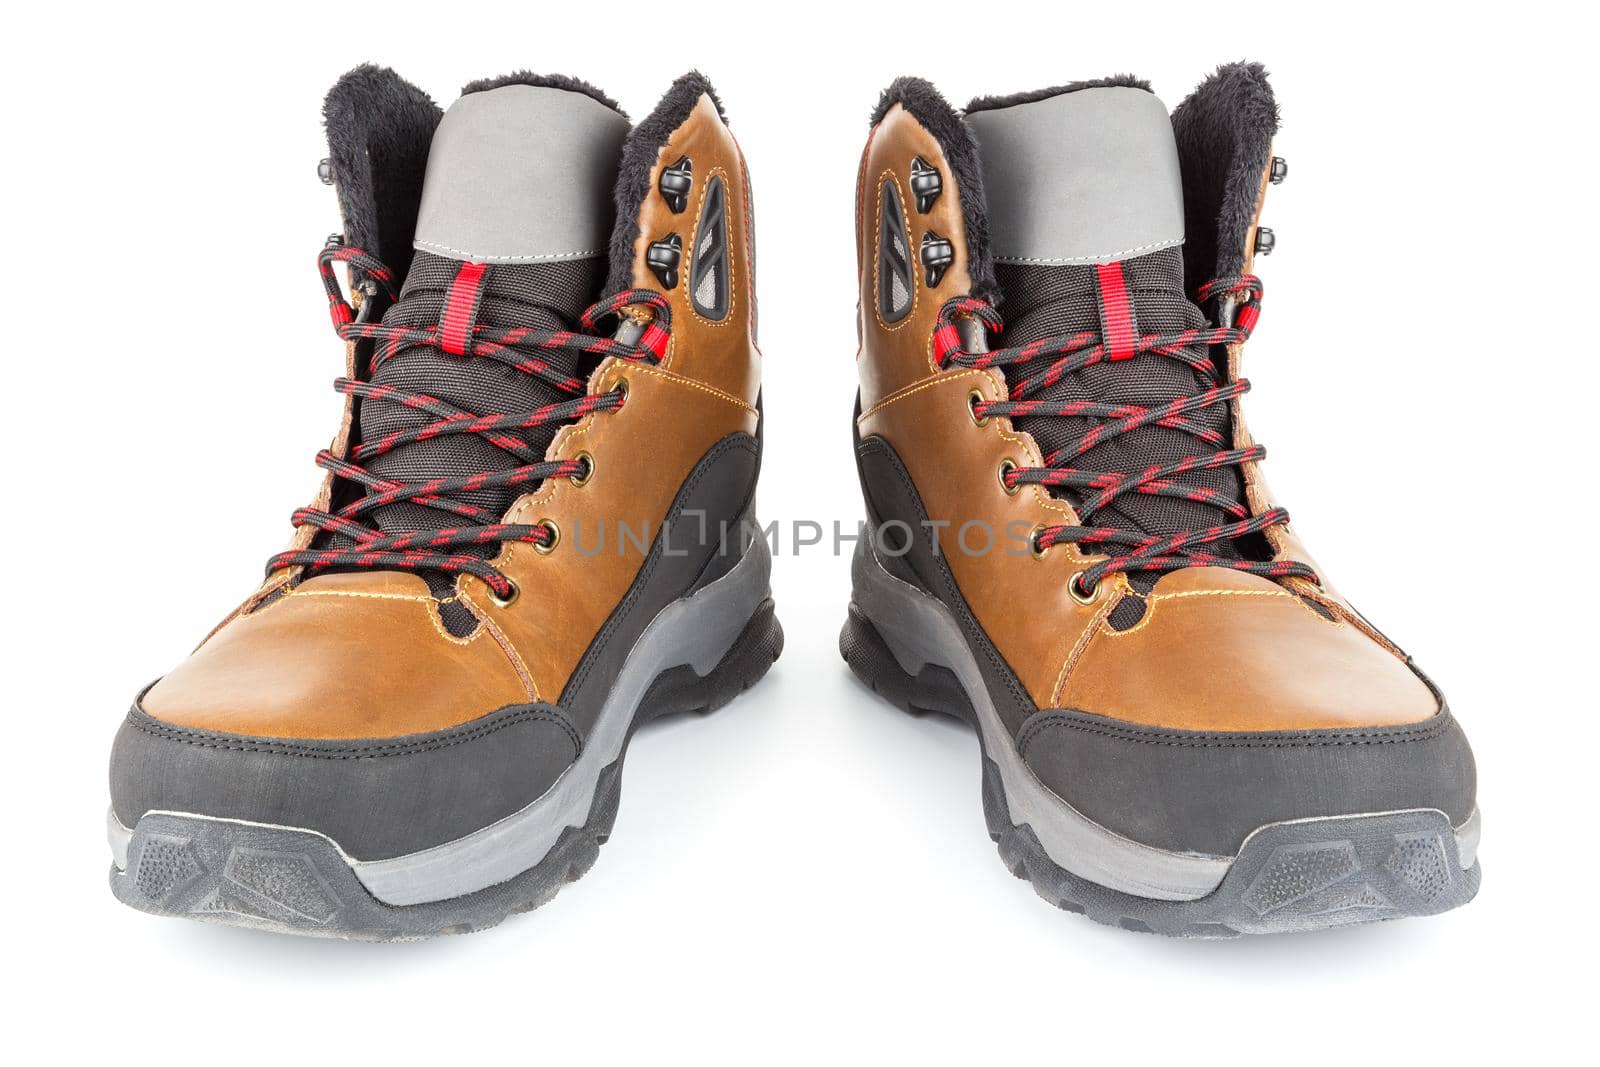 pair of brown insulated winter warm three quarter sneaker or boot isolated on white background, frontal perspective view